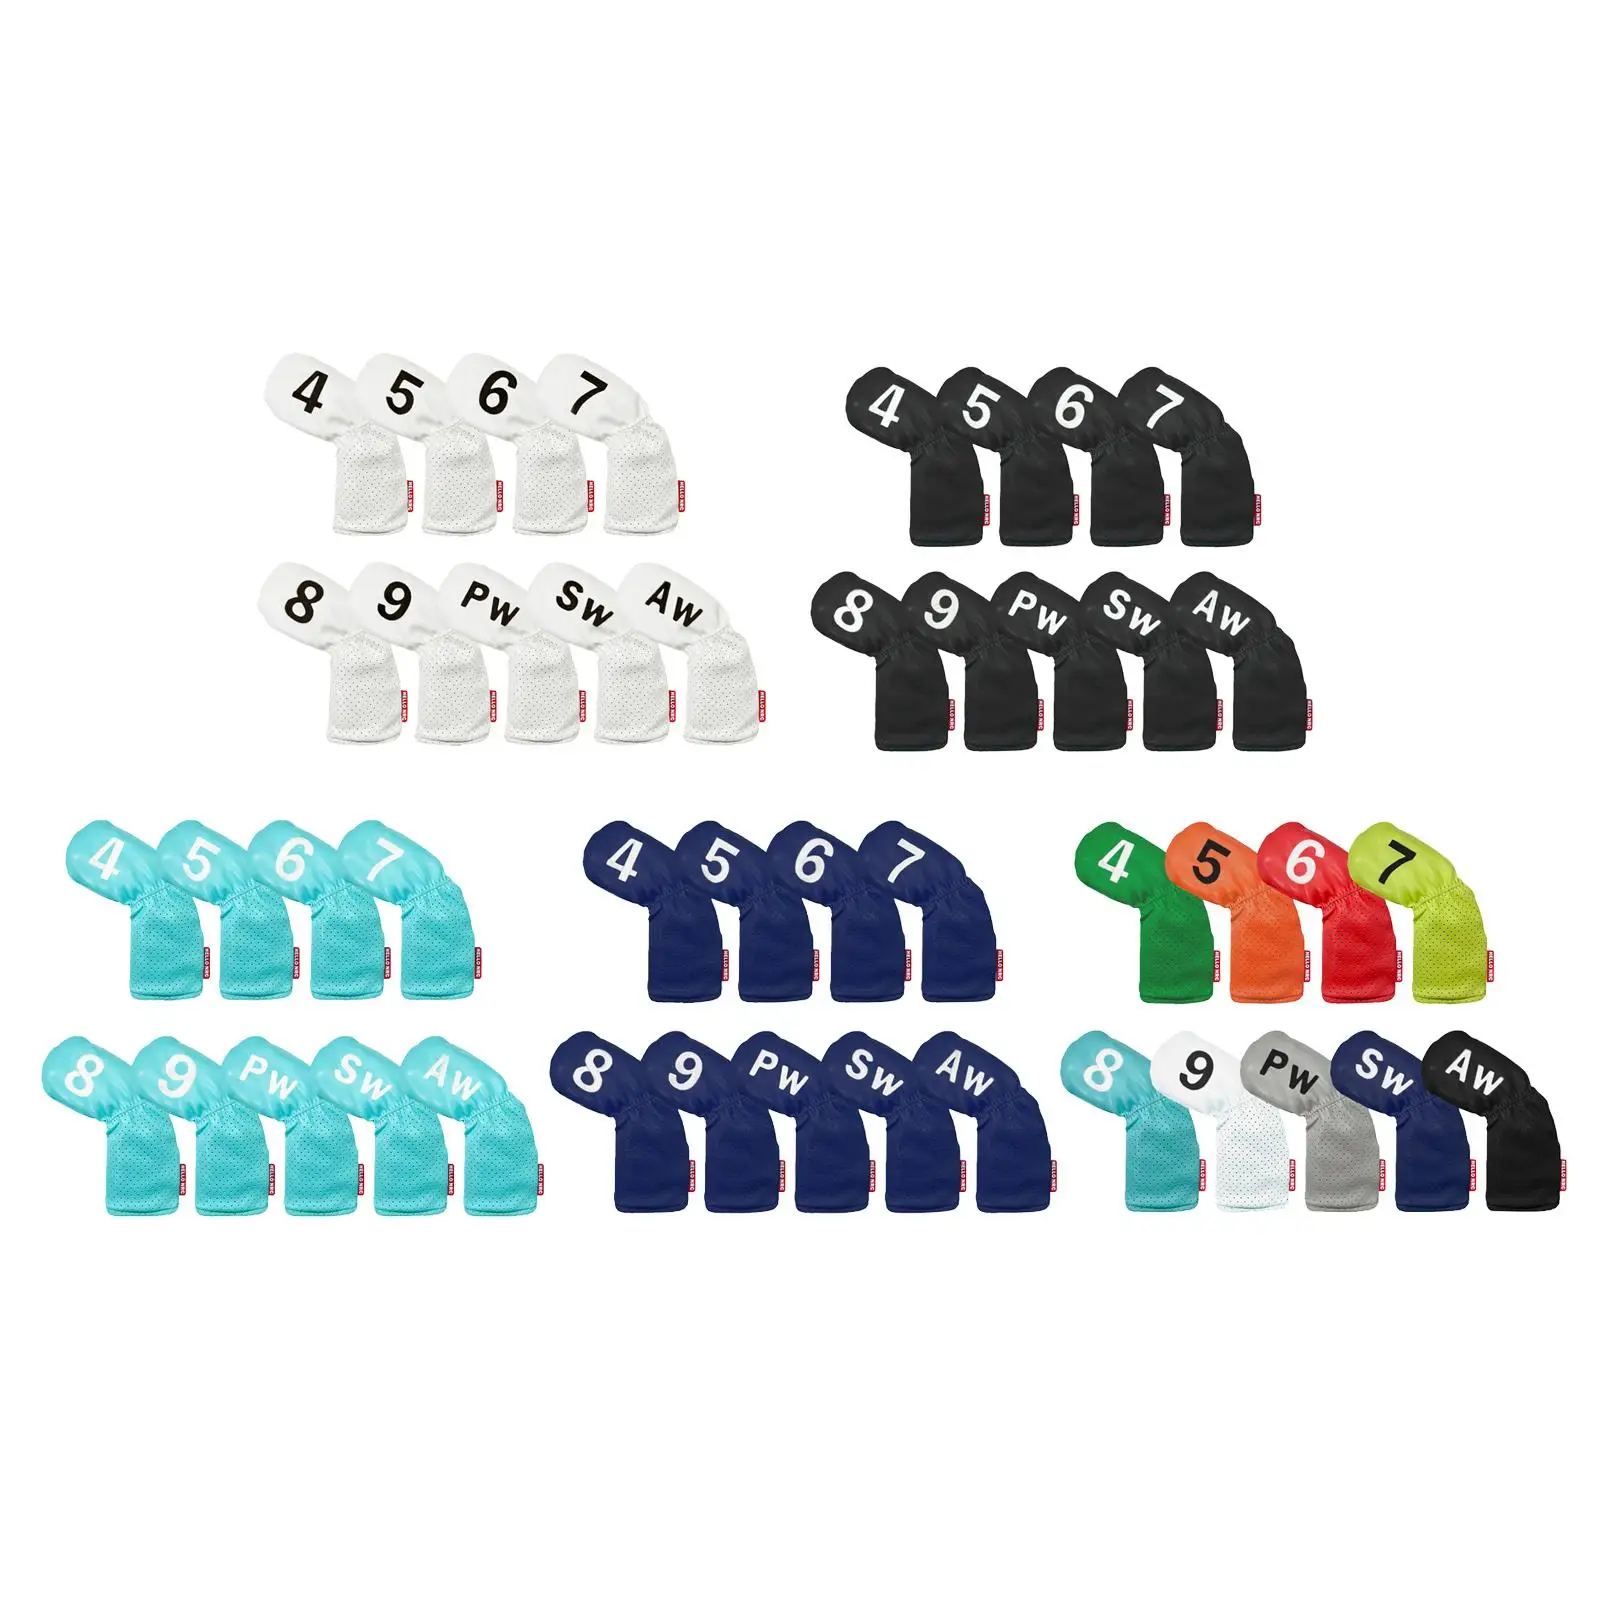 

9Pcs Golf Iron Headcover Golf Club Head Cover 4-9,PW,SW,AW PU Protection Waterproof Protector Fits All Brands Golf Accessories